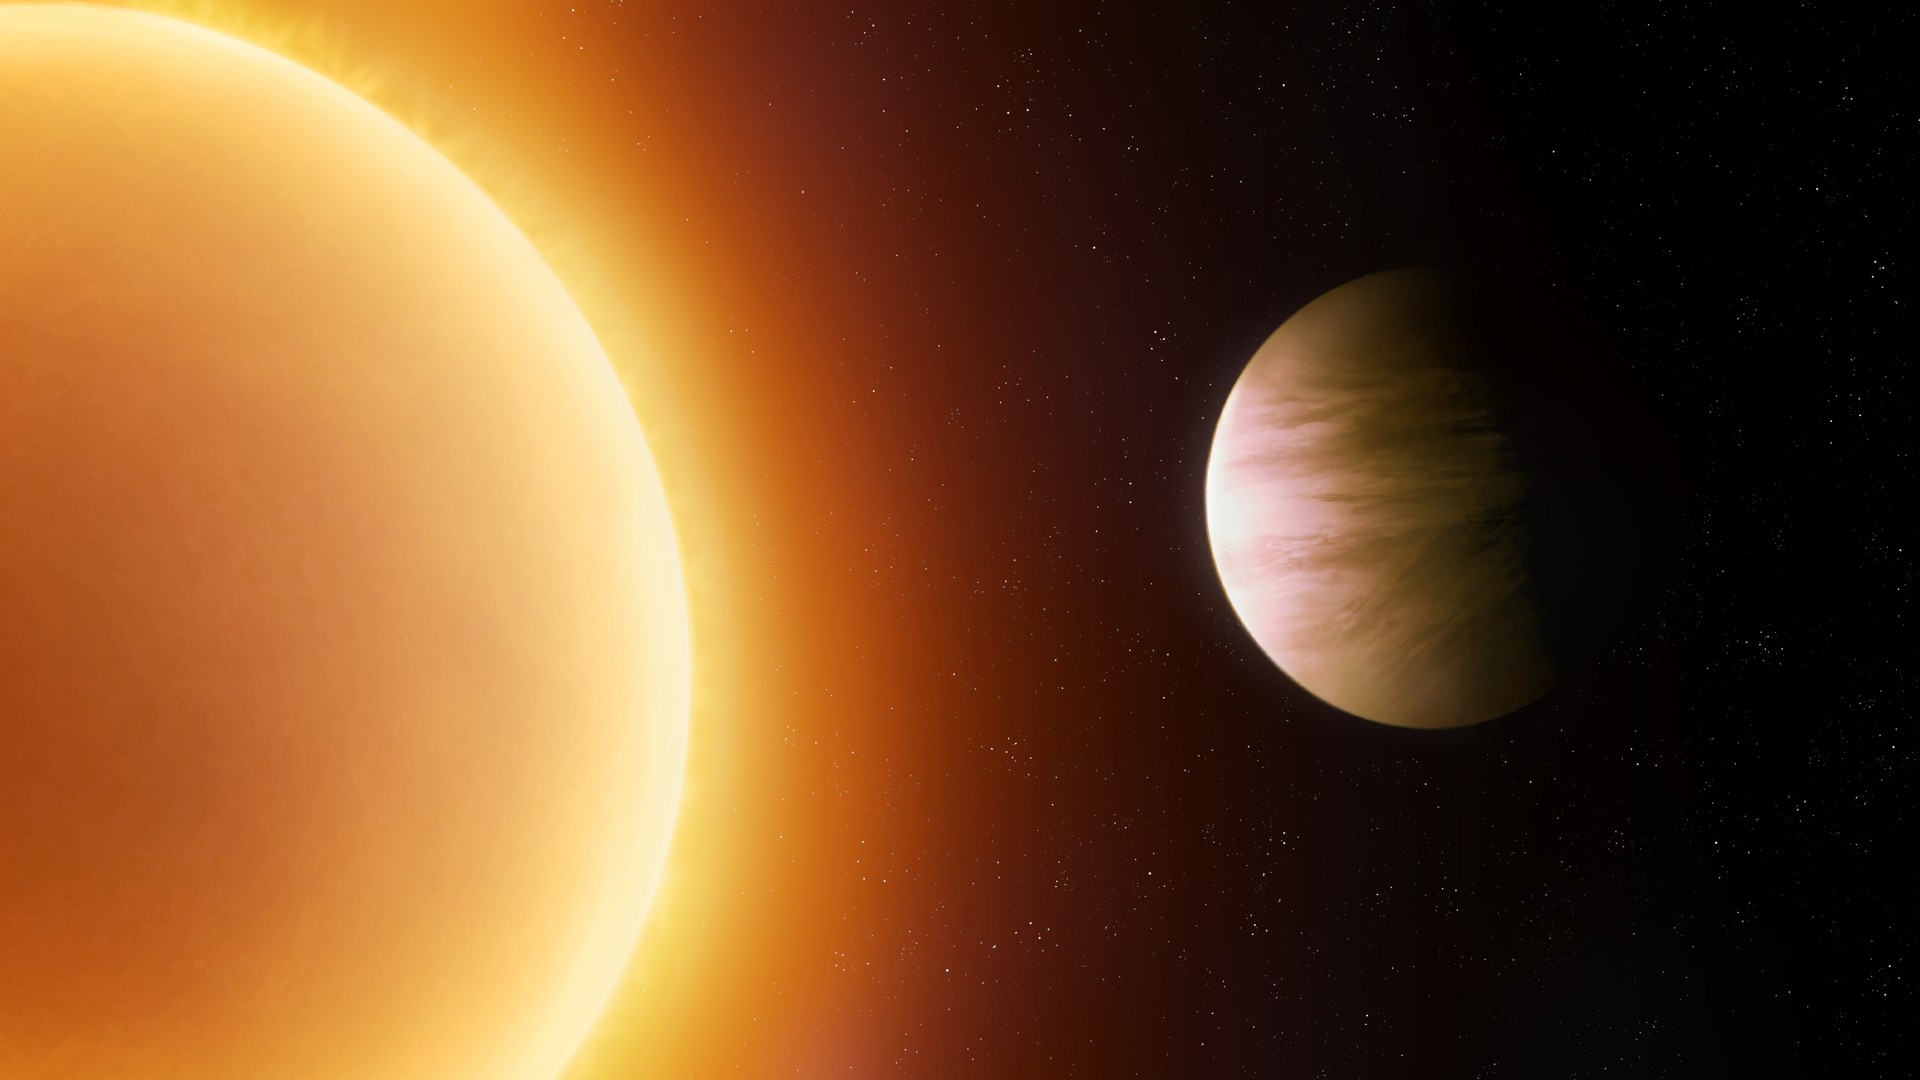 How could life survive on tidally locked planets?